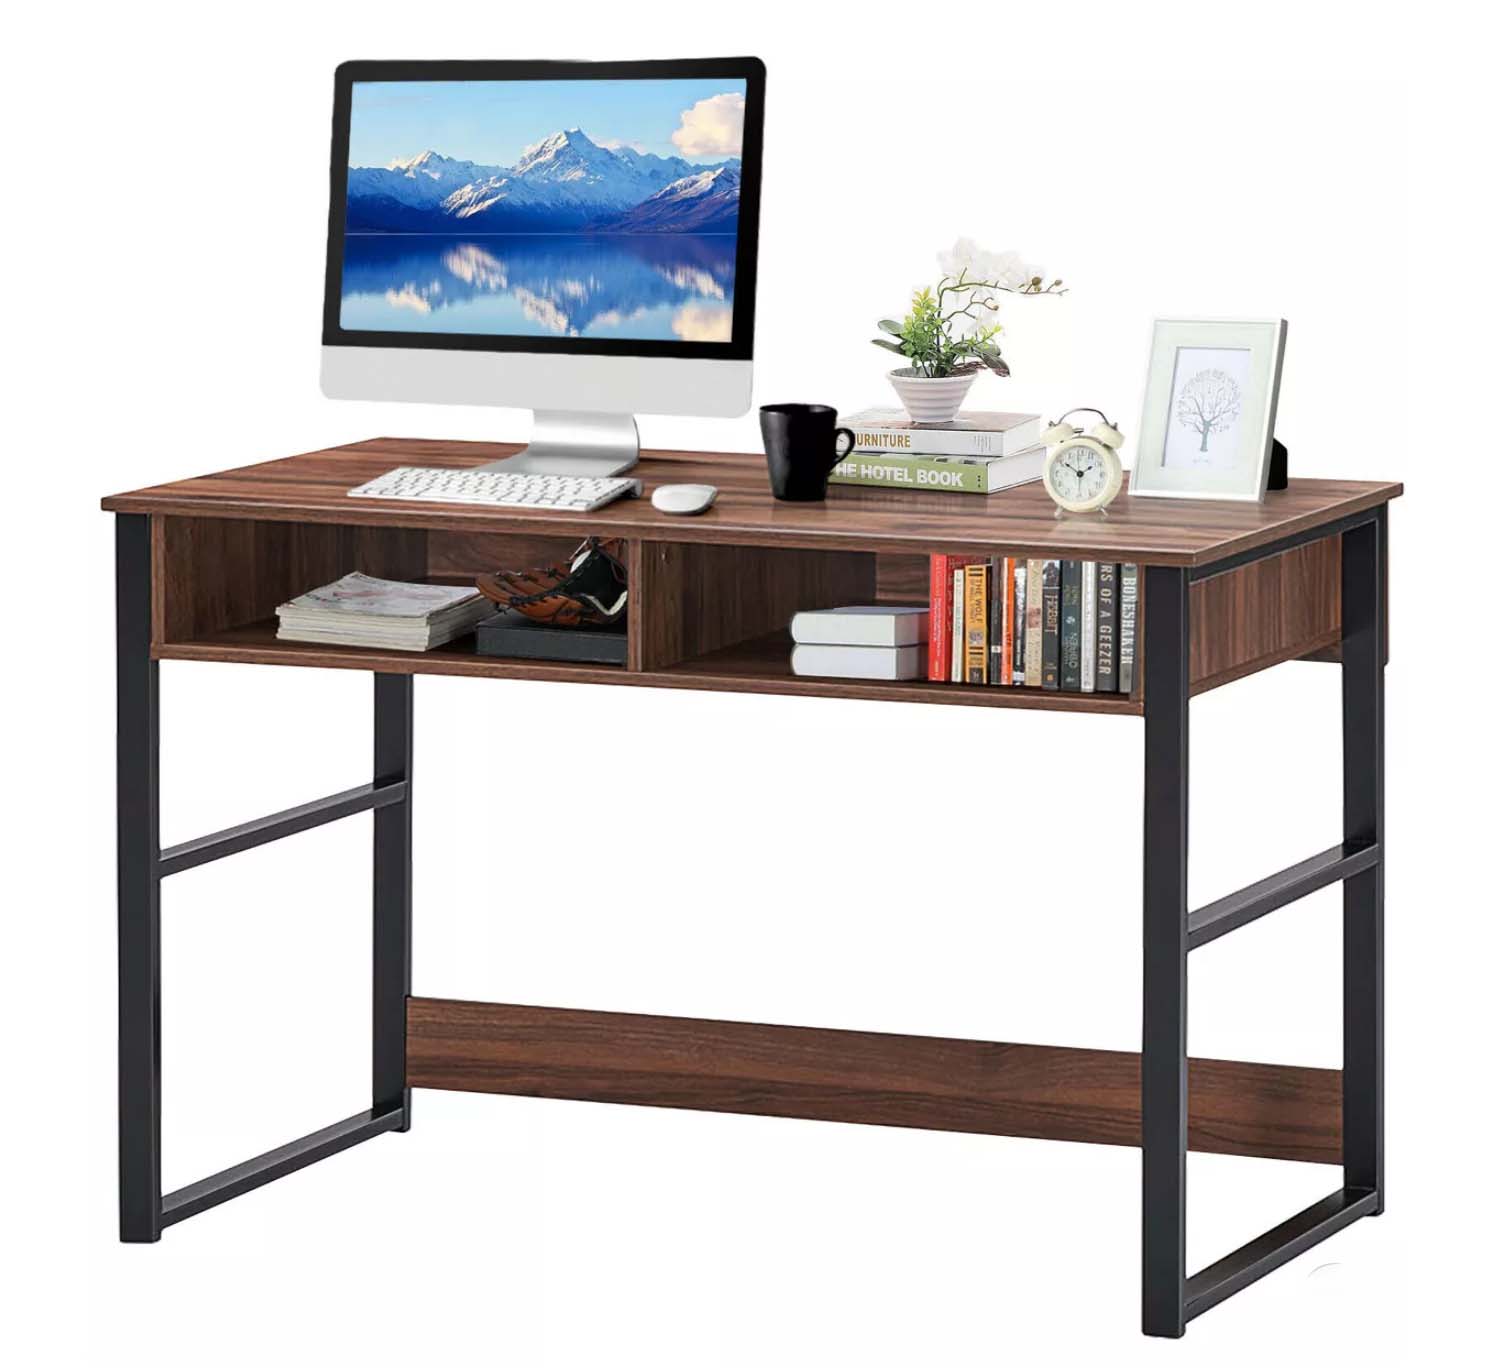 Costway Home Office Computer Desk with computer and home decor